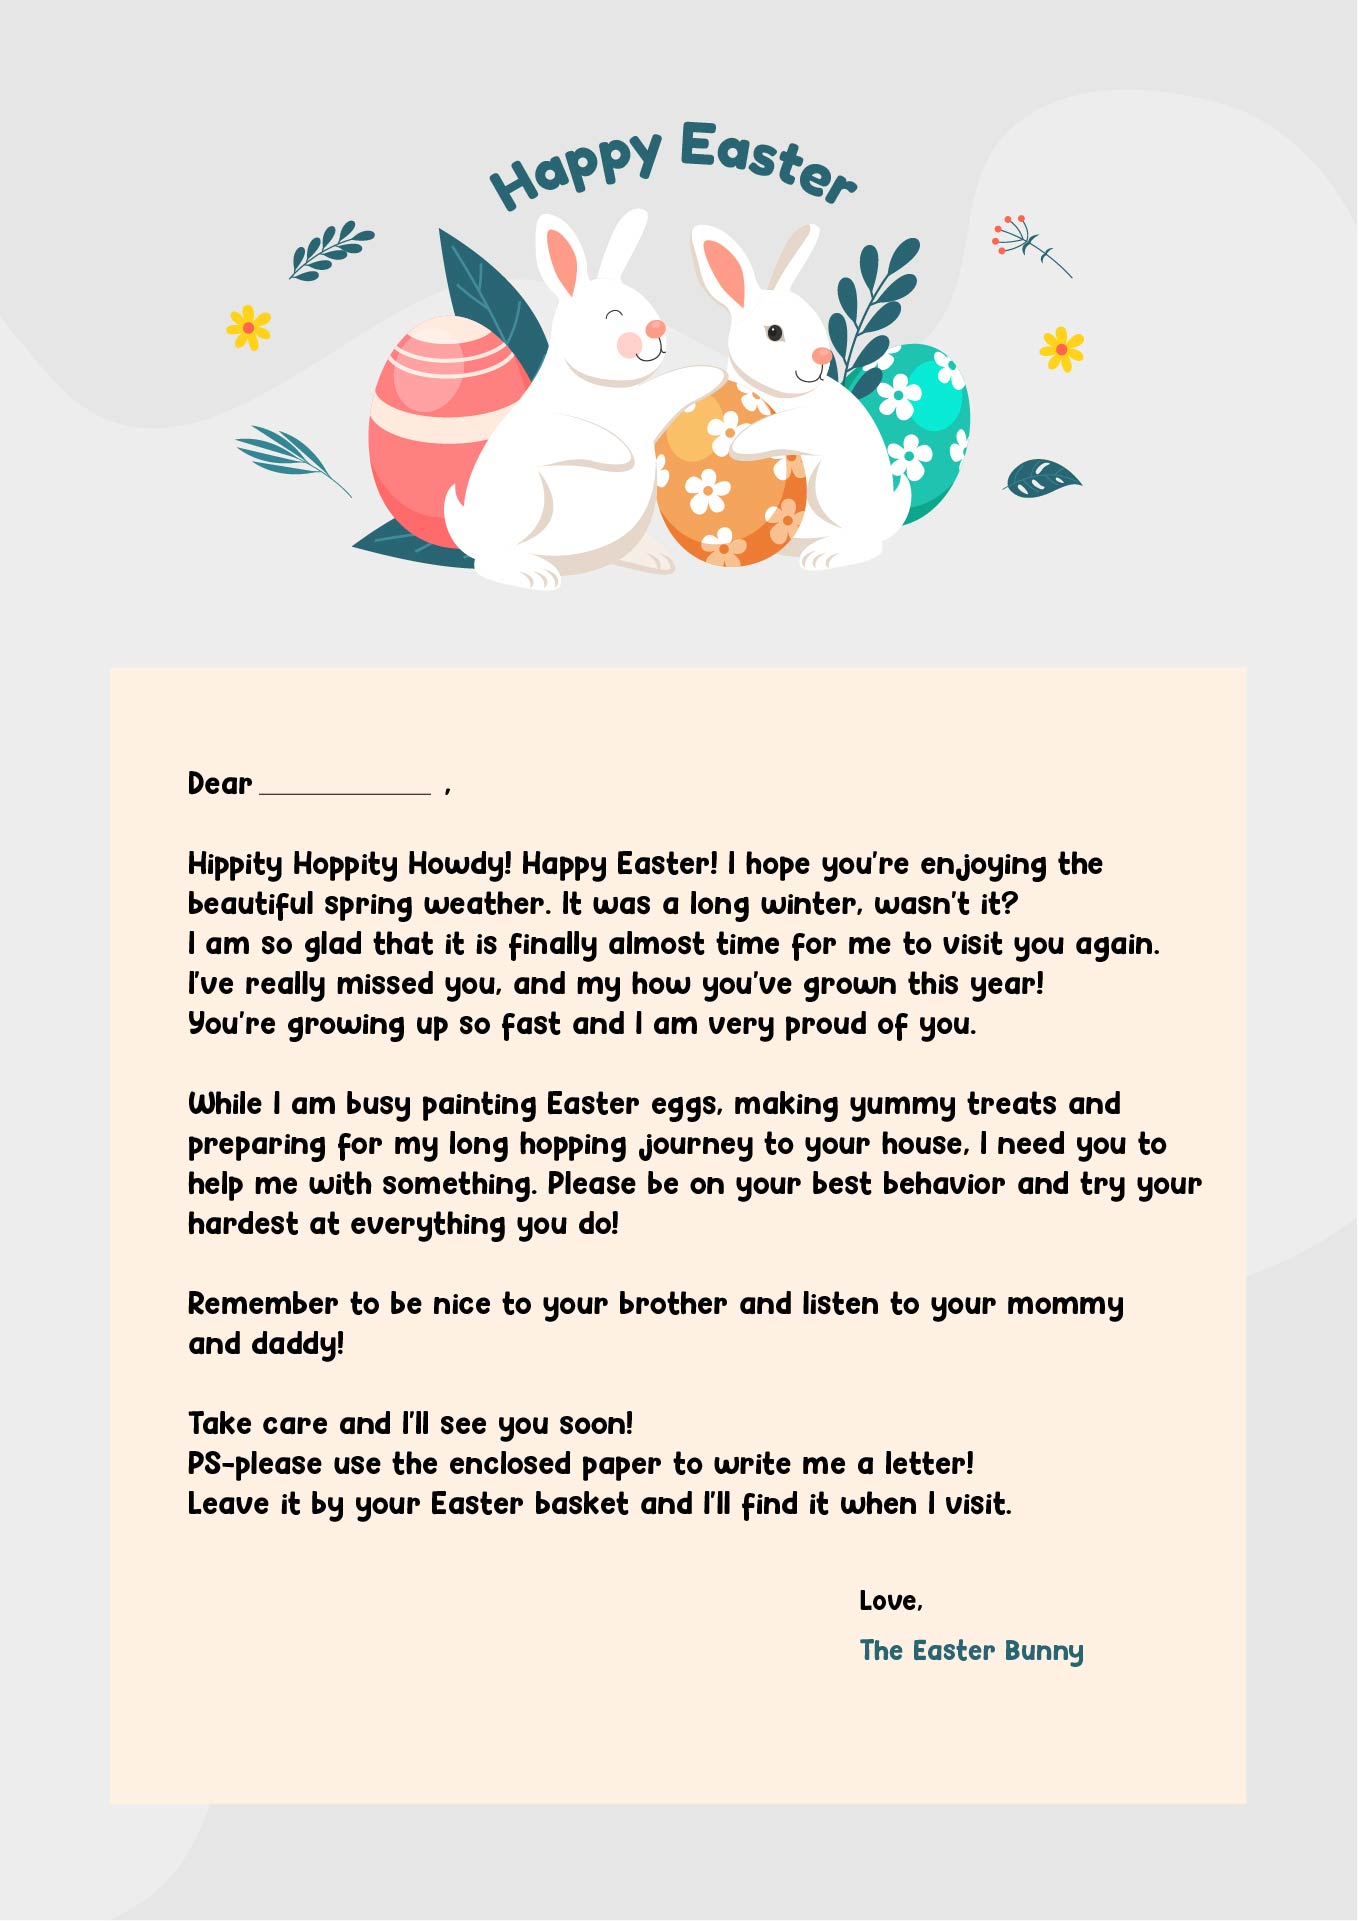 Letter From Easter Bunny to Children